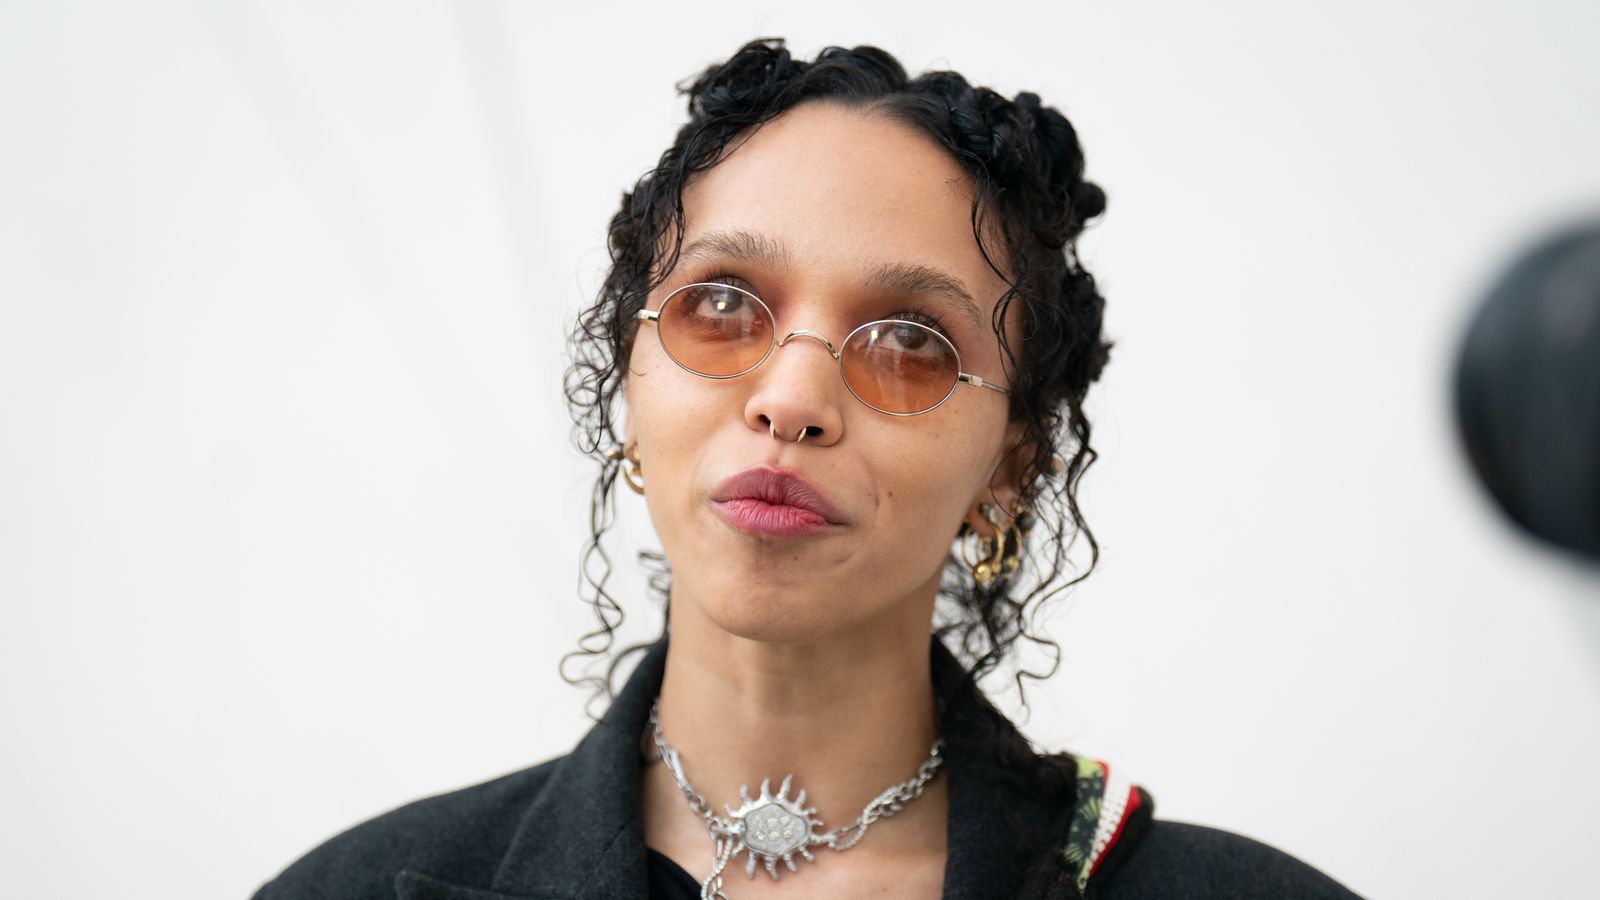 Calvin Klein ad featuring FKA Twig banned for objectifying women